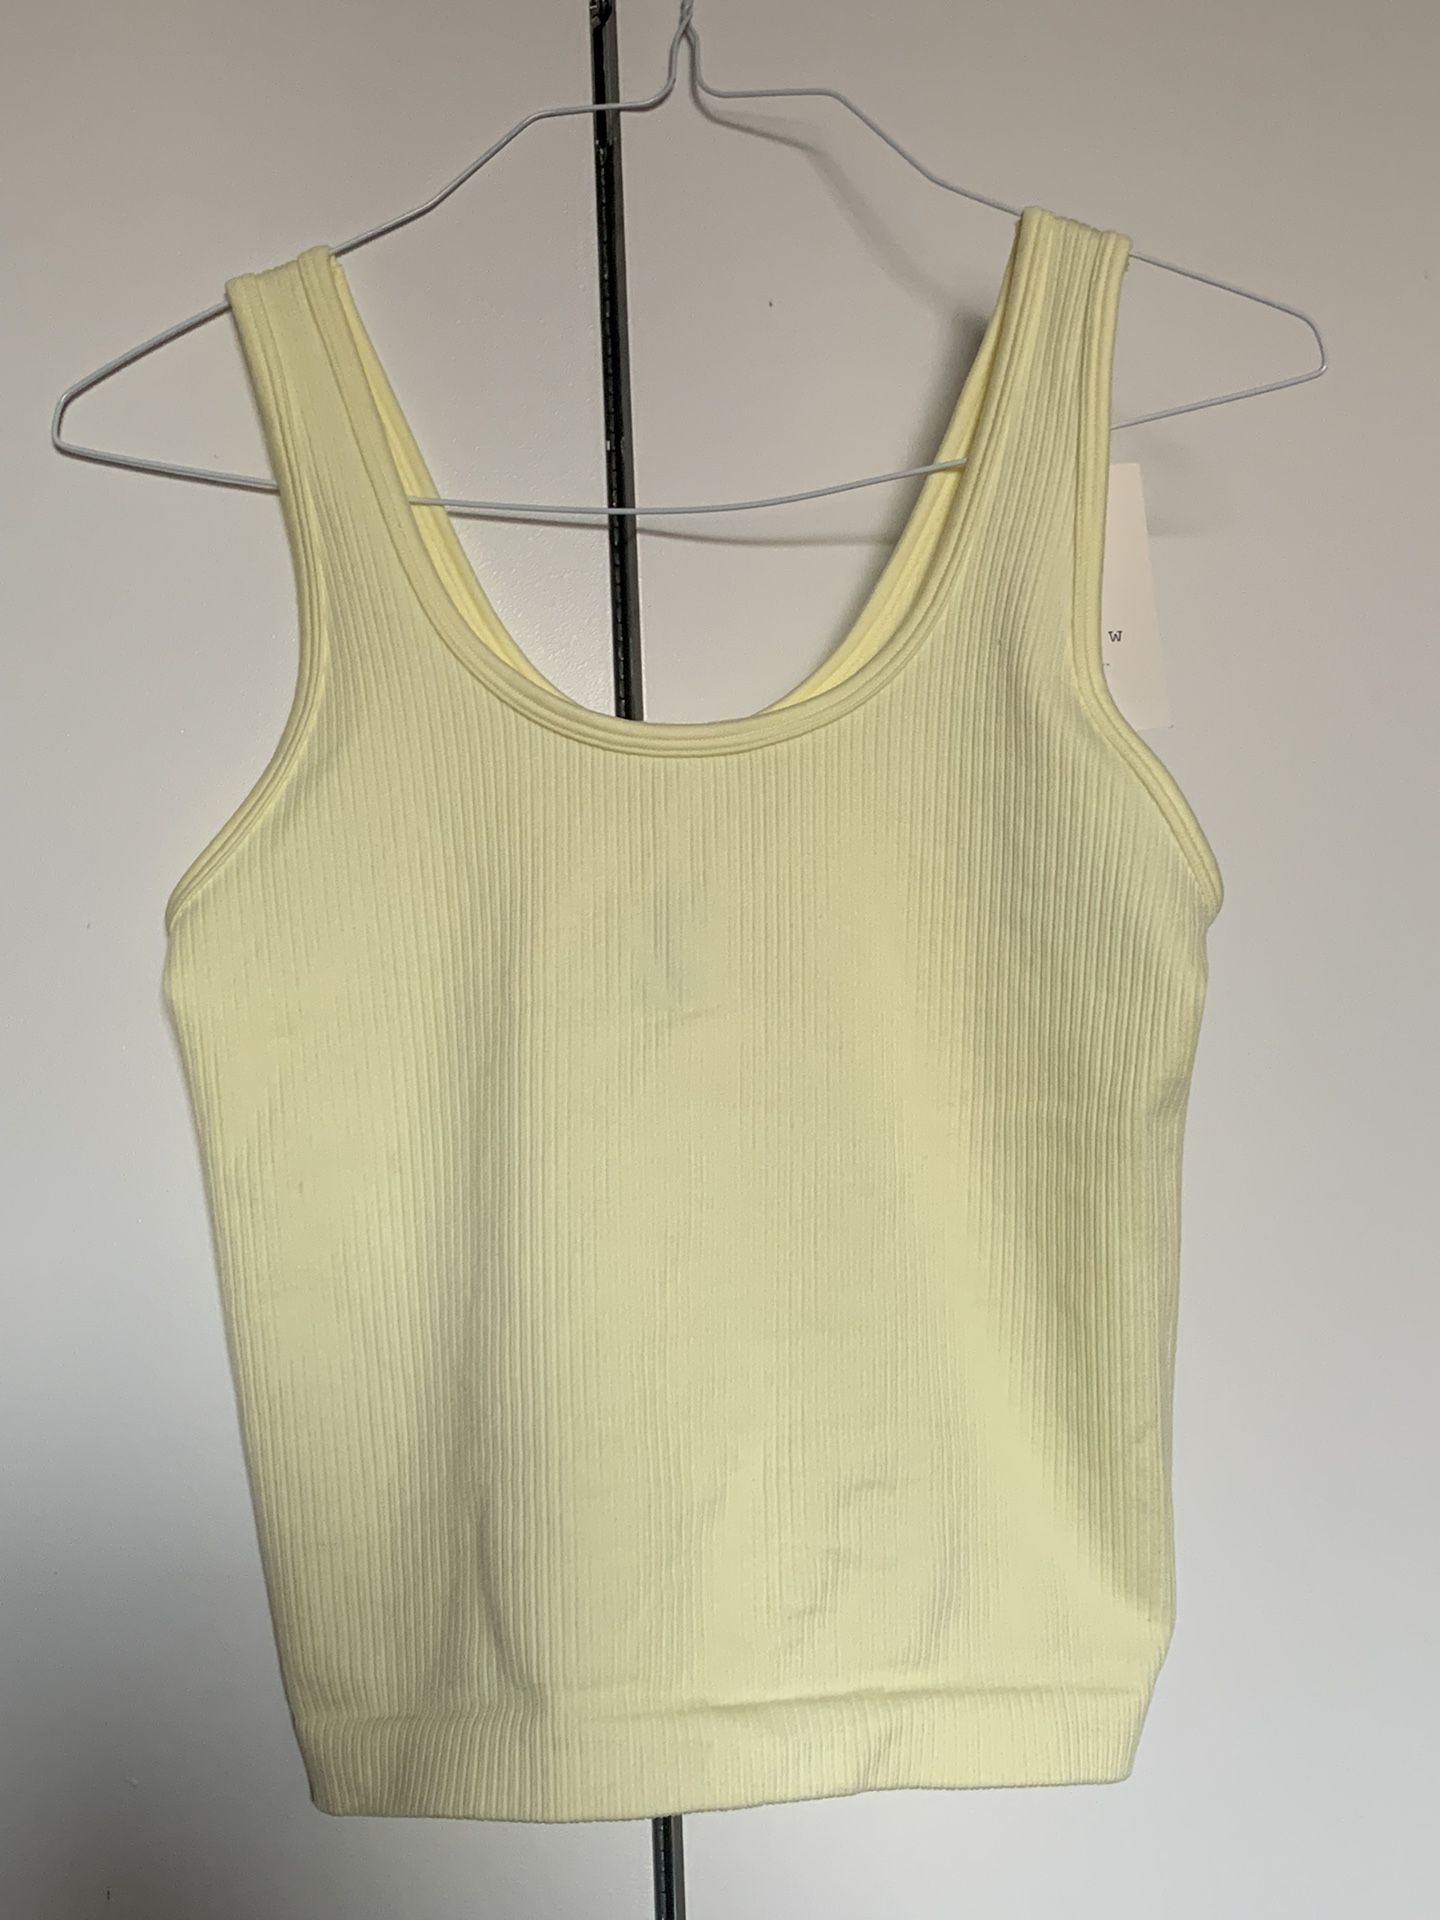 Women’s tank top size S, new with tag